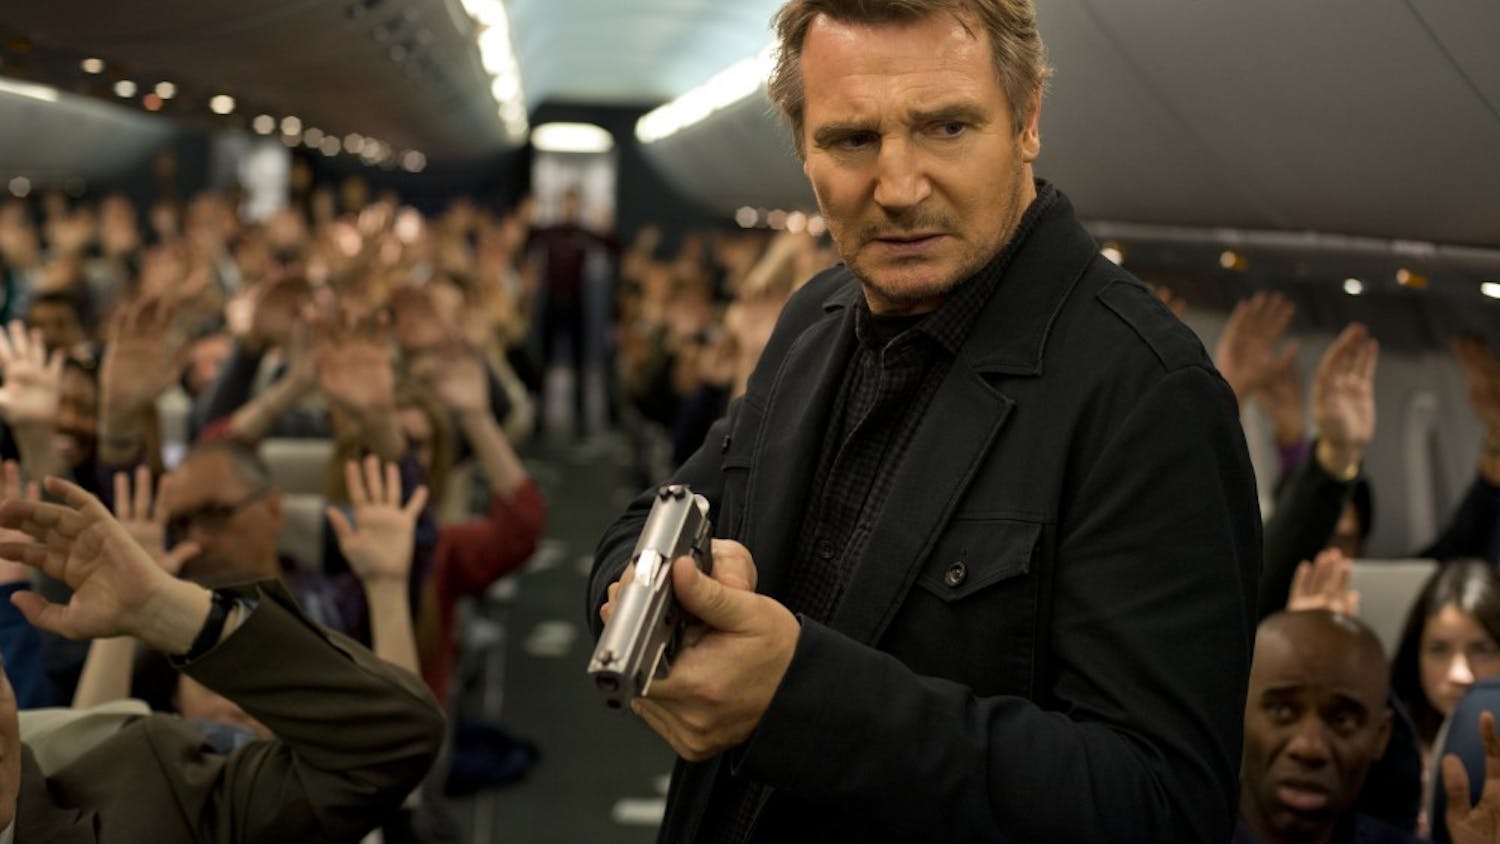 Global action star LIAM NEESON stars in “Non-Stop”, a suspense thriller played out at 40,000 feet in the air.  During a transatlantic flight from New York City to London, U.S. Air Marshal Bill Marks (Neeson) receives a series of cryptic text messages demanding that he instruct the airline to transfer $150 million into an off-shore account.  Until he secures the money, a passenger on his flight will be killed every 20 minutes.  